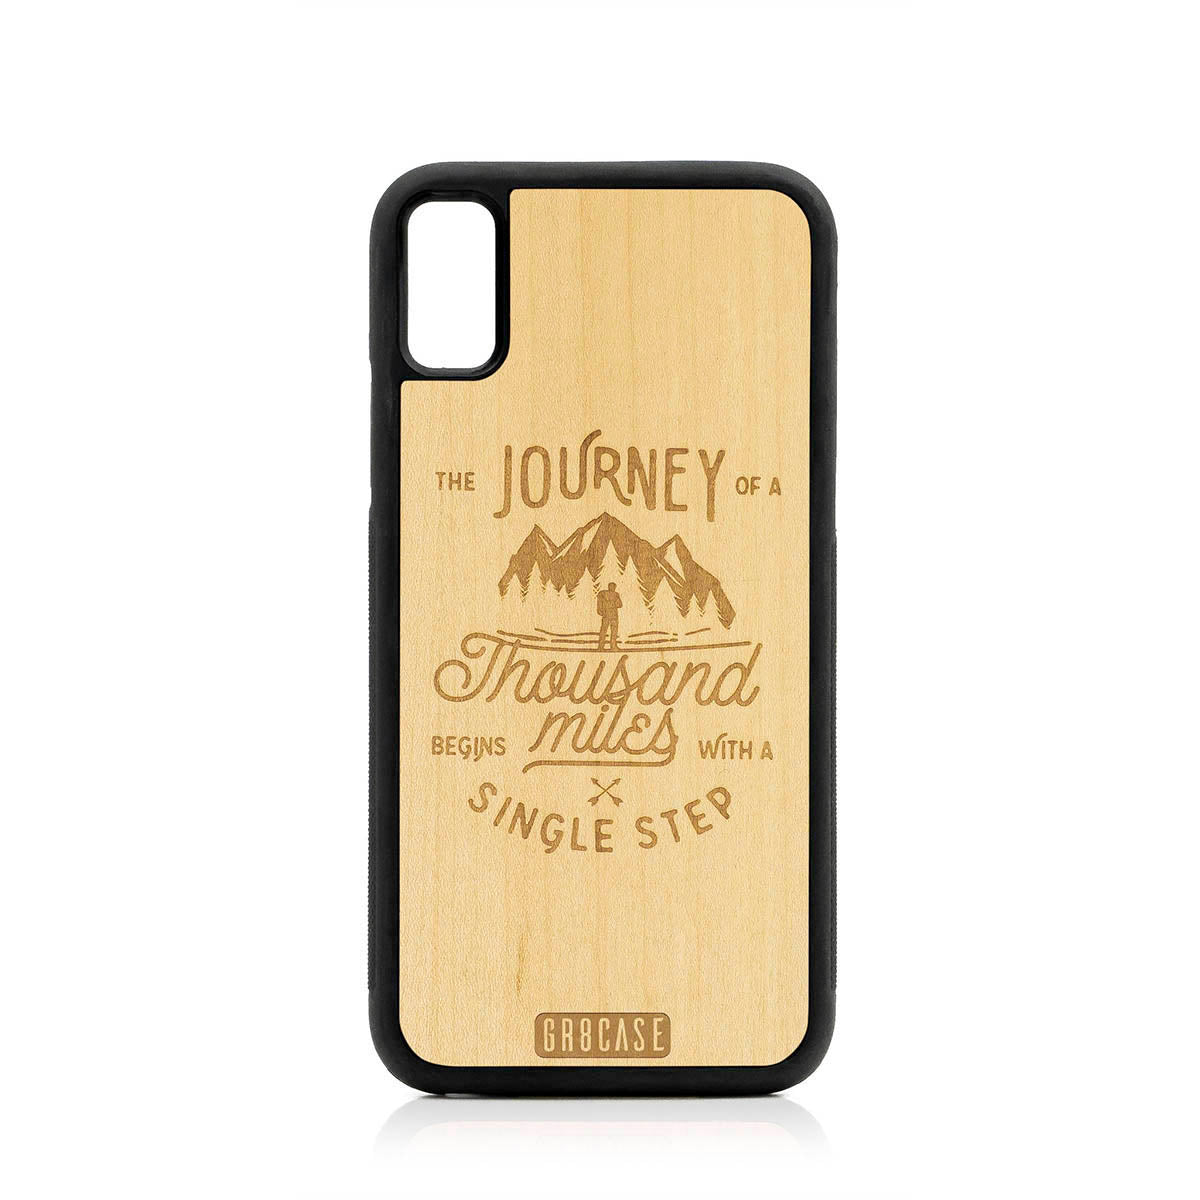 The Journey Of A Thousand Miles Begins With A Single Step Design Wood Case For iPhone X/XS